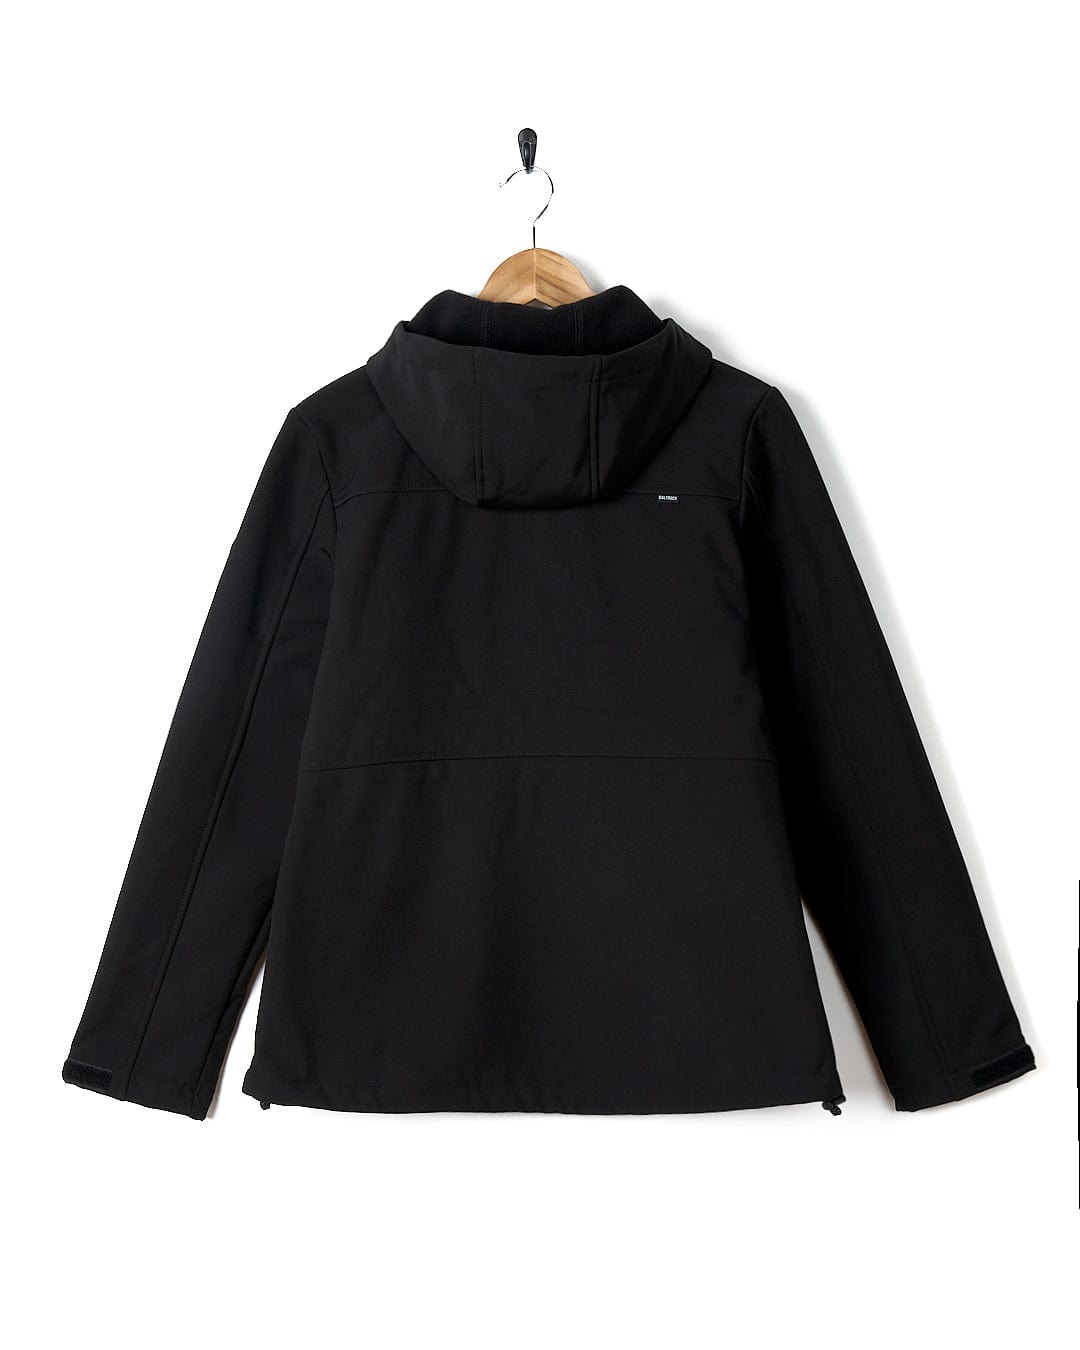 A Solae 2 - Womens Softshell Jacket - Black by Saltrock hanging on a hanger.